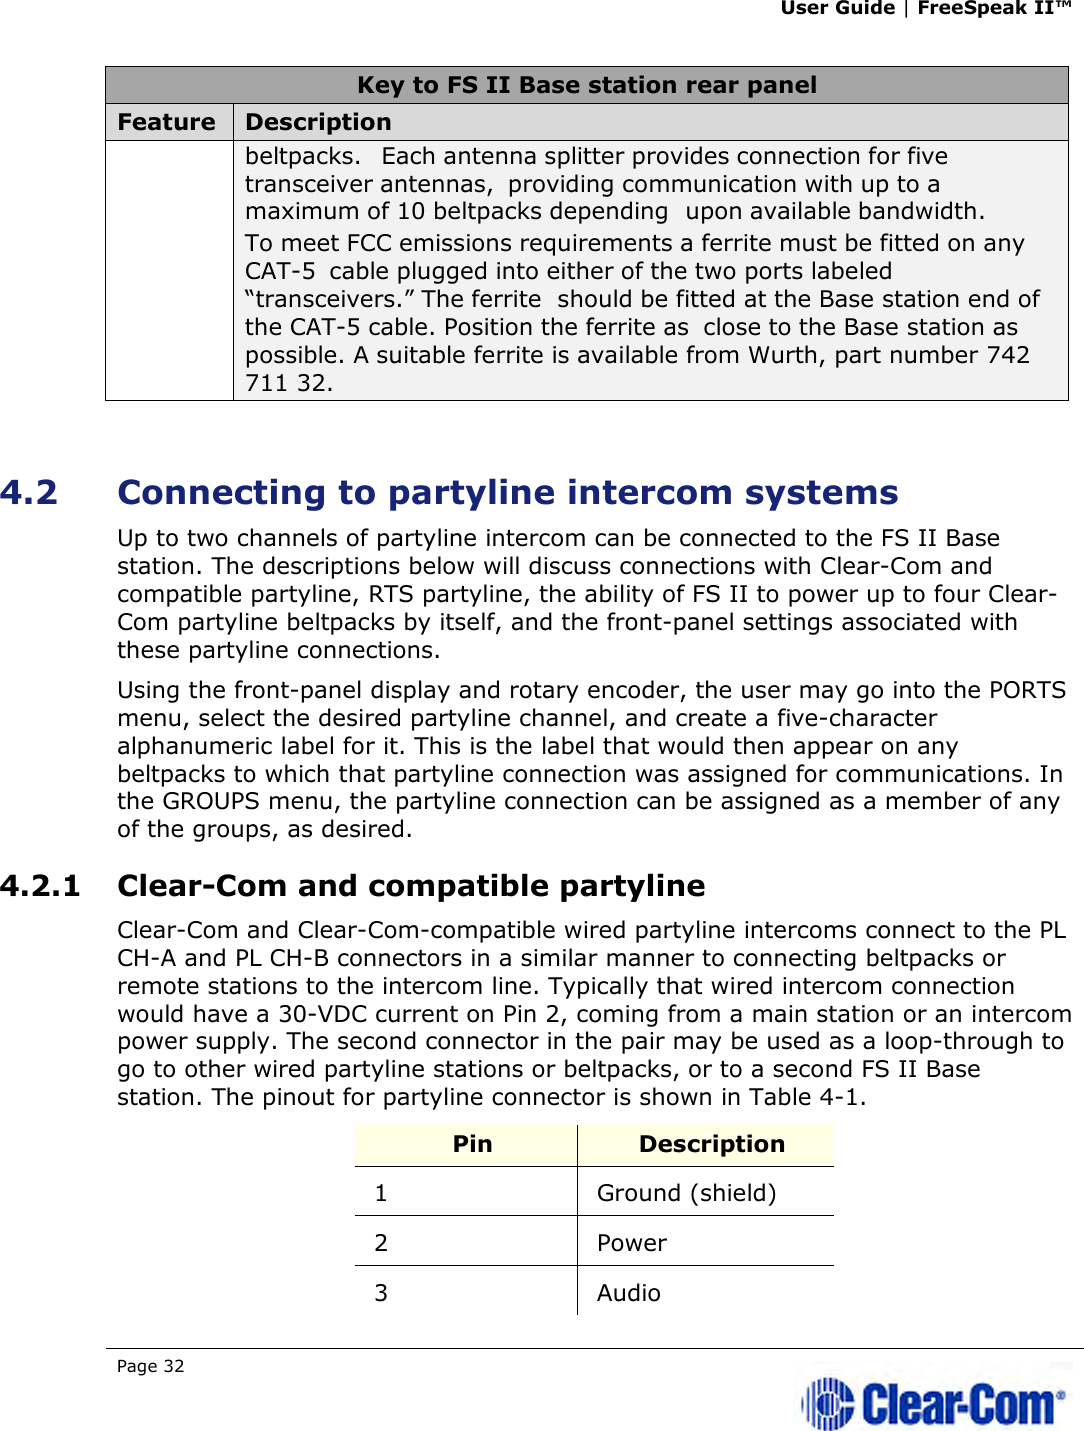 User Guide | FreeSpeak II™  Page 32   Key to FS II Base station rear panel Feature  Description beltpacks. Each antenna splitter provides connection for five transceiver antennas, providing communication with up to a maximum of 10 beltpacks depending upon available bandwidth. To meet FCC emissions requirements a ferrite must be fitted on any CAT-5 cable plugged into either of the two ports labeled “transceivers.” The ferrite should be fitted at the Base station end of the CAT-5 cable. Position the ferrite as  close to the Base station as possible. A suitable ferrite is available from Wurth, part number 742 711 32.  4.2 Connecting to partyline intercom systems Up to two channels of partyline intercom can be connected to the FS II Base station. The descriptions below will discuss connections with Clear-Com and compatible partyline, RTS partyline, the ability of FS II to power up to four Clear-Com partyline beltpacks by itself, and the front-panel settings associated with these partyline connections. Using the front-panel display and rotary encoder, the user may go into the PORTS menu, select the desired partyline channel, and create a five-character alphanumeric label for it. This is the label that would then appear on any beltpacks to which that partyline connection was assigned for communications. In the GROUPS menu, the partyline connection can be assigned as a member of any of the groups, as desired. 4.2.1 Clear-Com and compatible partyline Clear-Com and Clear-Com-compatible wired partyline intercoms connect to the PL CH-A and PL CH-B connectors in a similar manner to connecting beltpacks or remote stations to the intercom line. Typically that wired intercom connection would have a 30-VDC current on Pin 2, coming from a main station or an intercom power supply. The second connector in the pair may be used as a loop-through to go to other wired partyline stations or beltpacks, or to a second FS II Base station. The pinout for partyline connector is shown in Table 4-1. Pin  Description 1  Ground (shield) 2  Power 3  Audio 